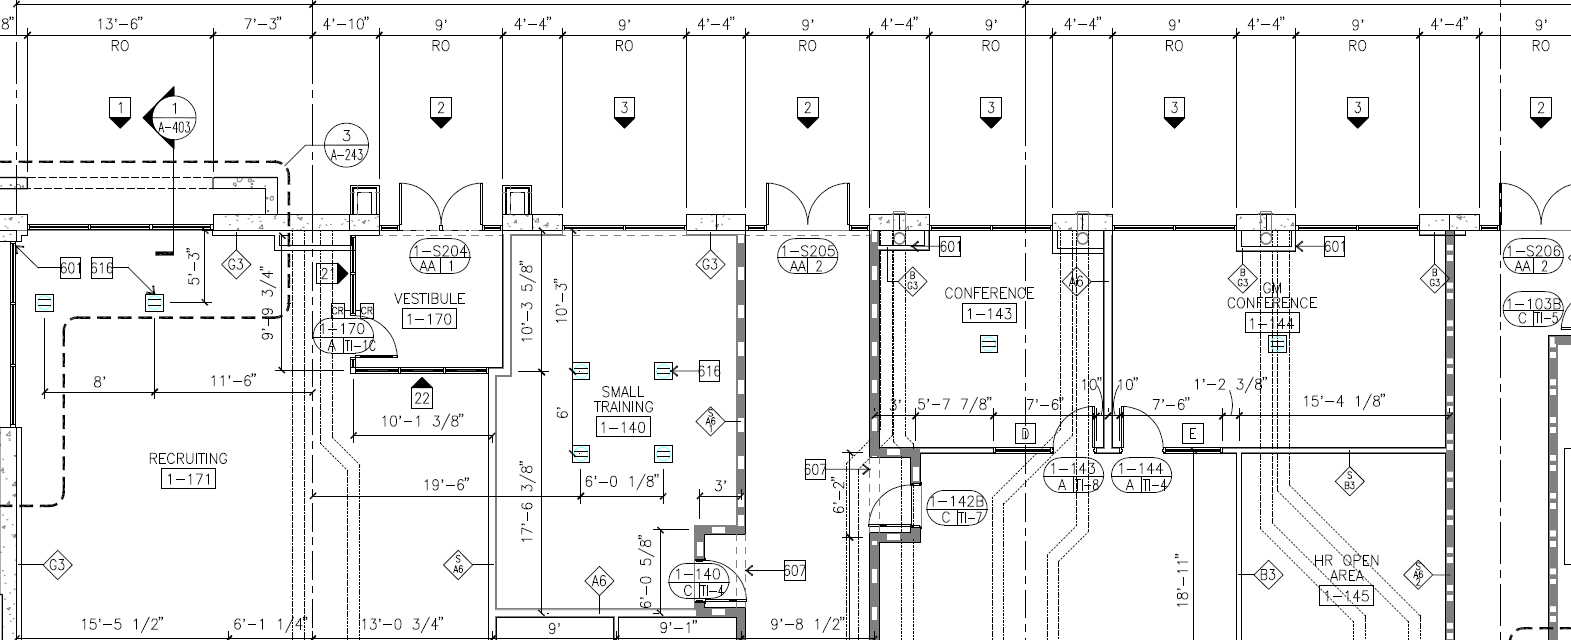 Blueprint Shows Door Types and Hardware Schedule for Take-offs and Installation